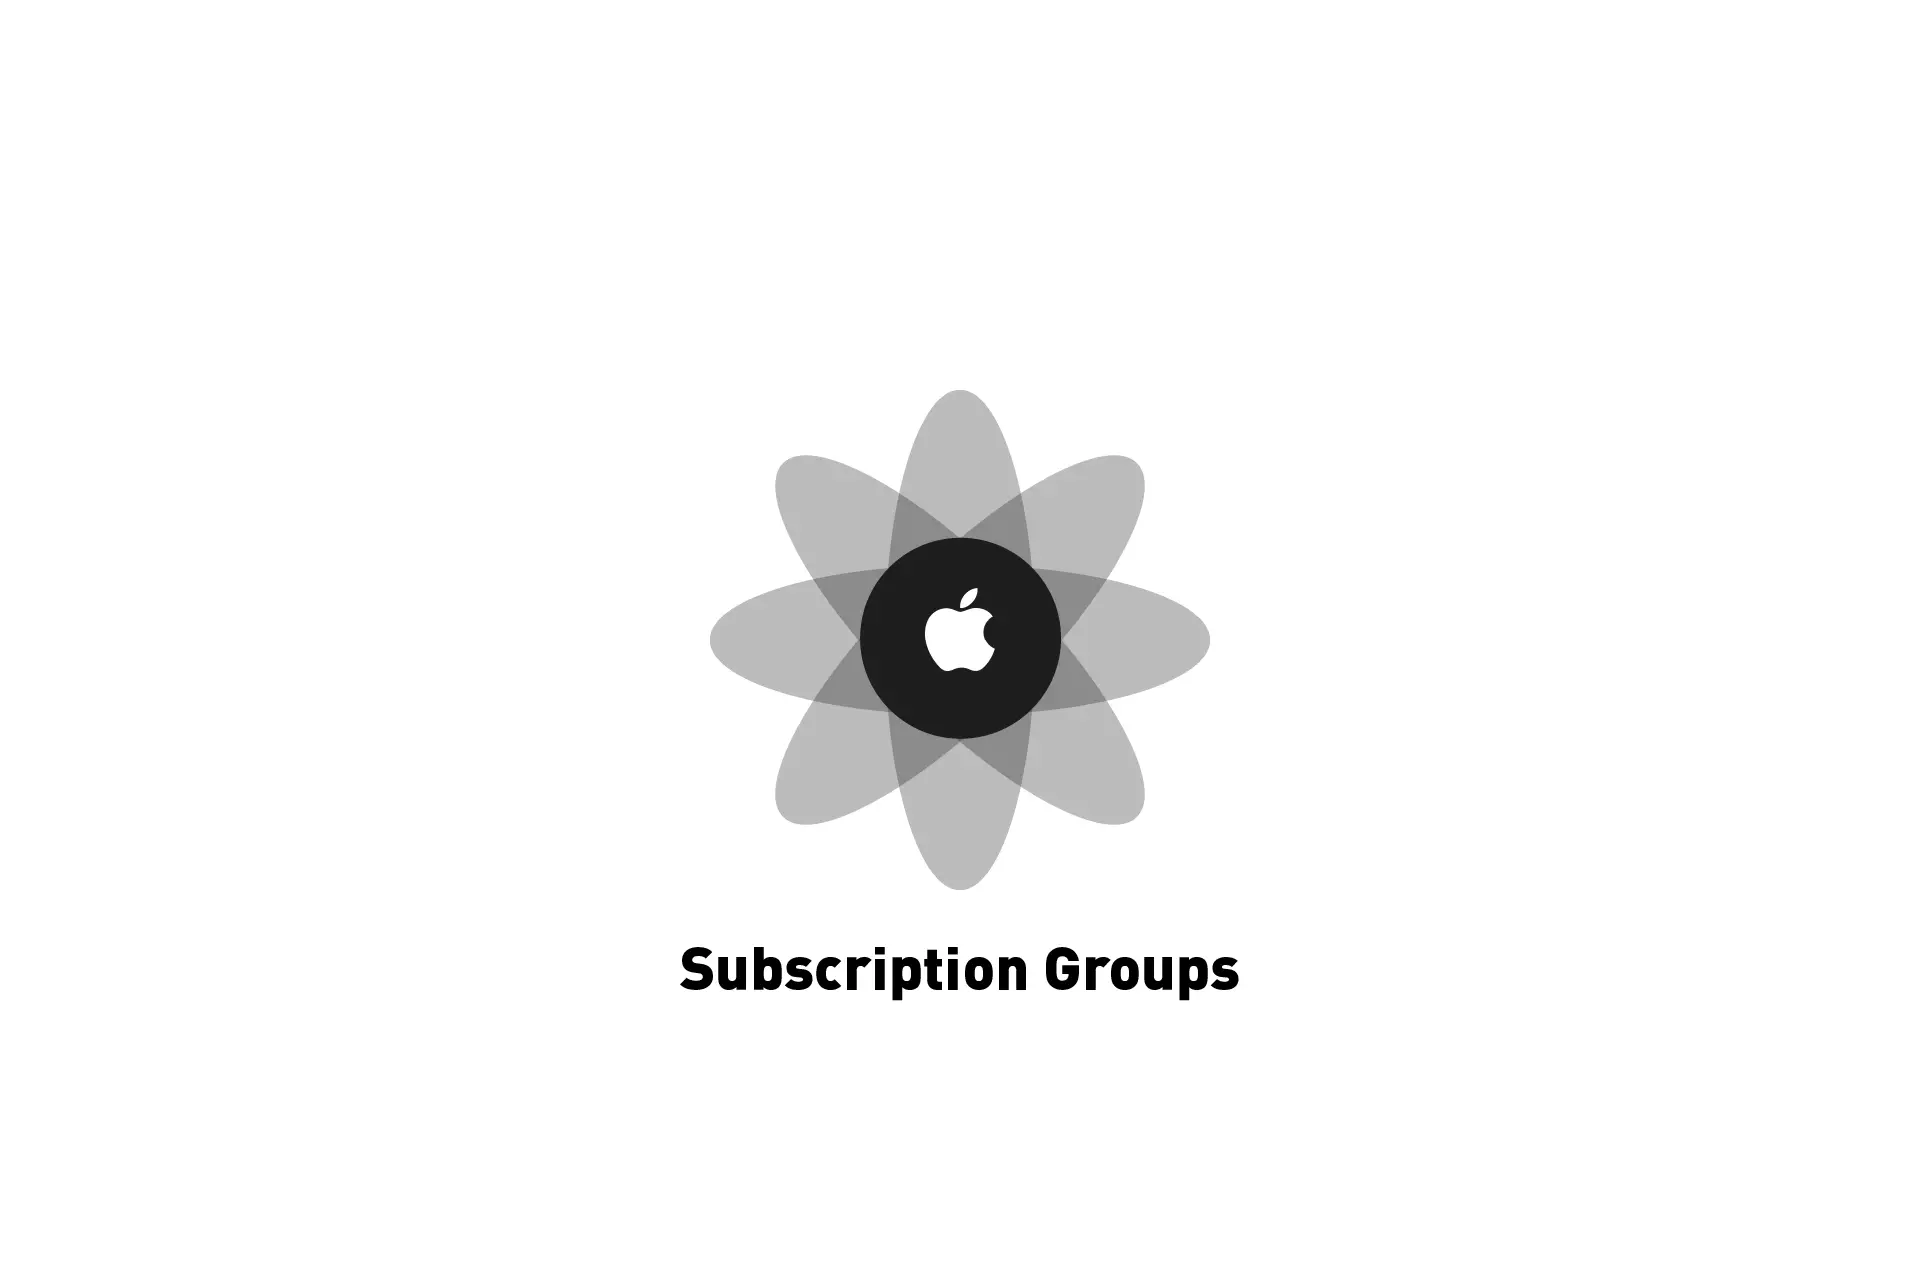 A flower that represents Apple with the text "Subscription Groups" beneath it.